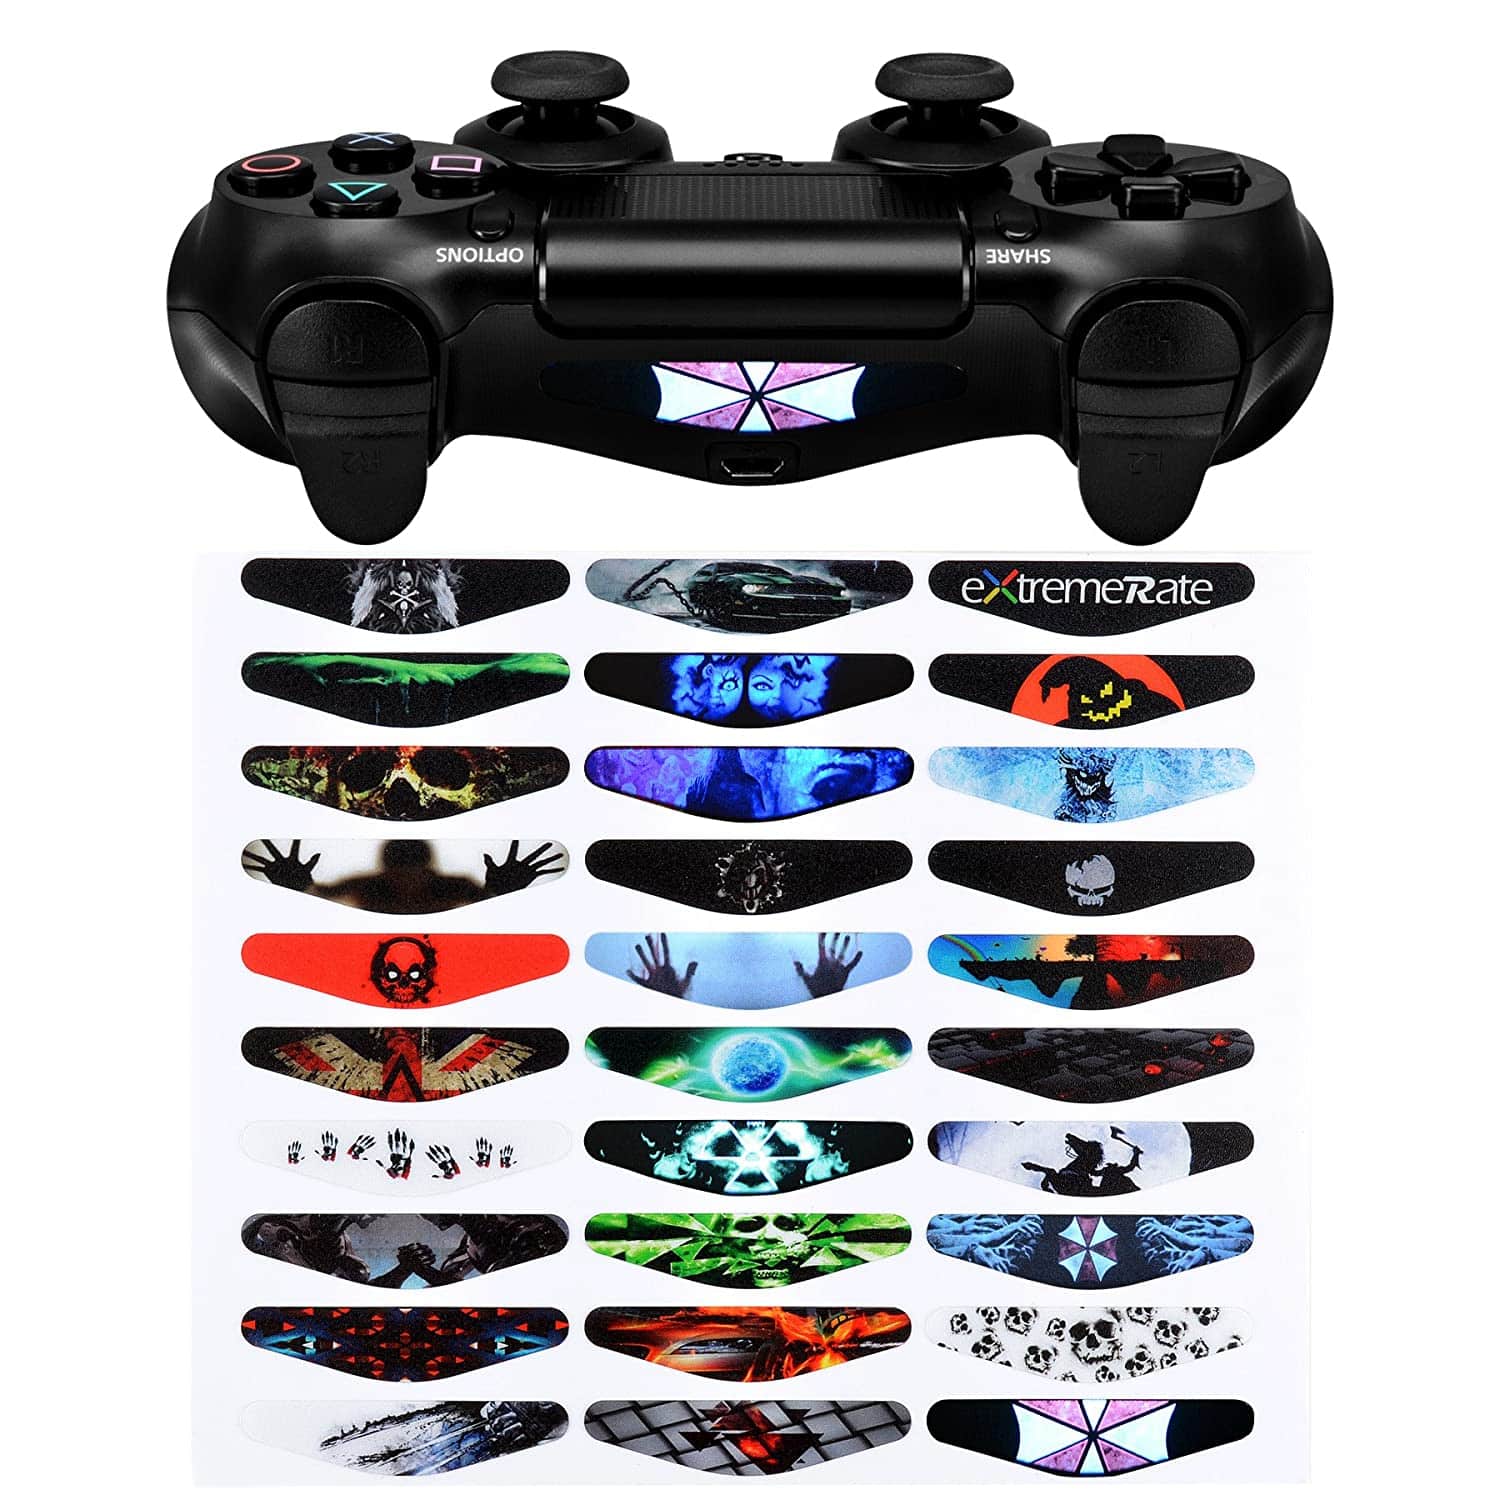 Light Bar Decal Stickers Set of 30 Different Pcs for PS4 Playstation 4 ...